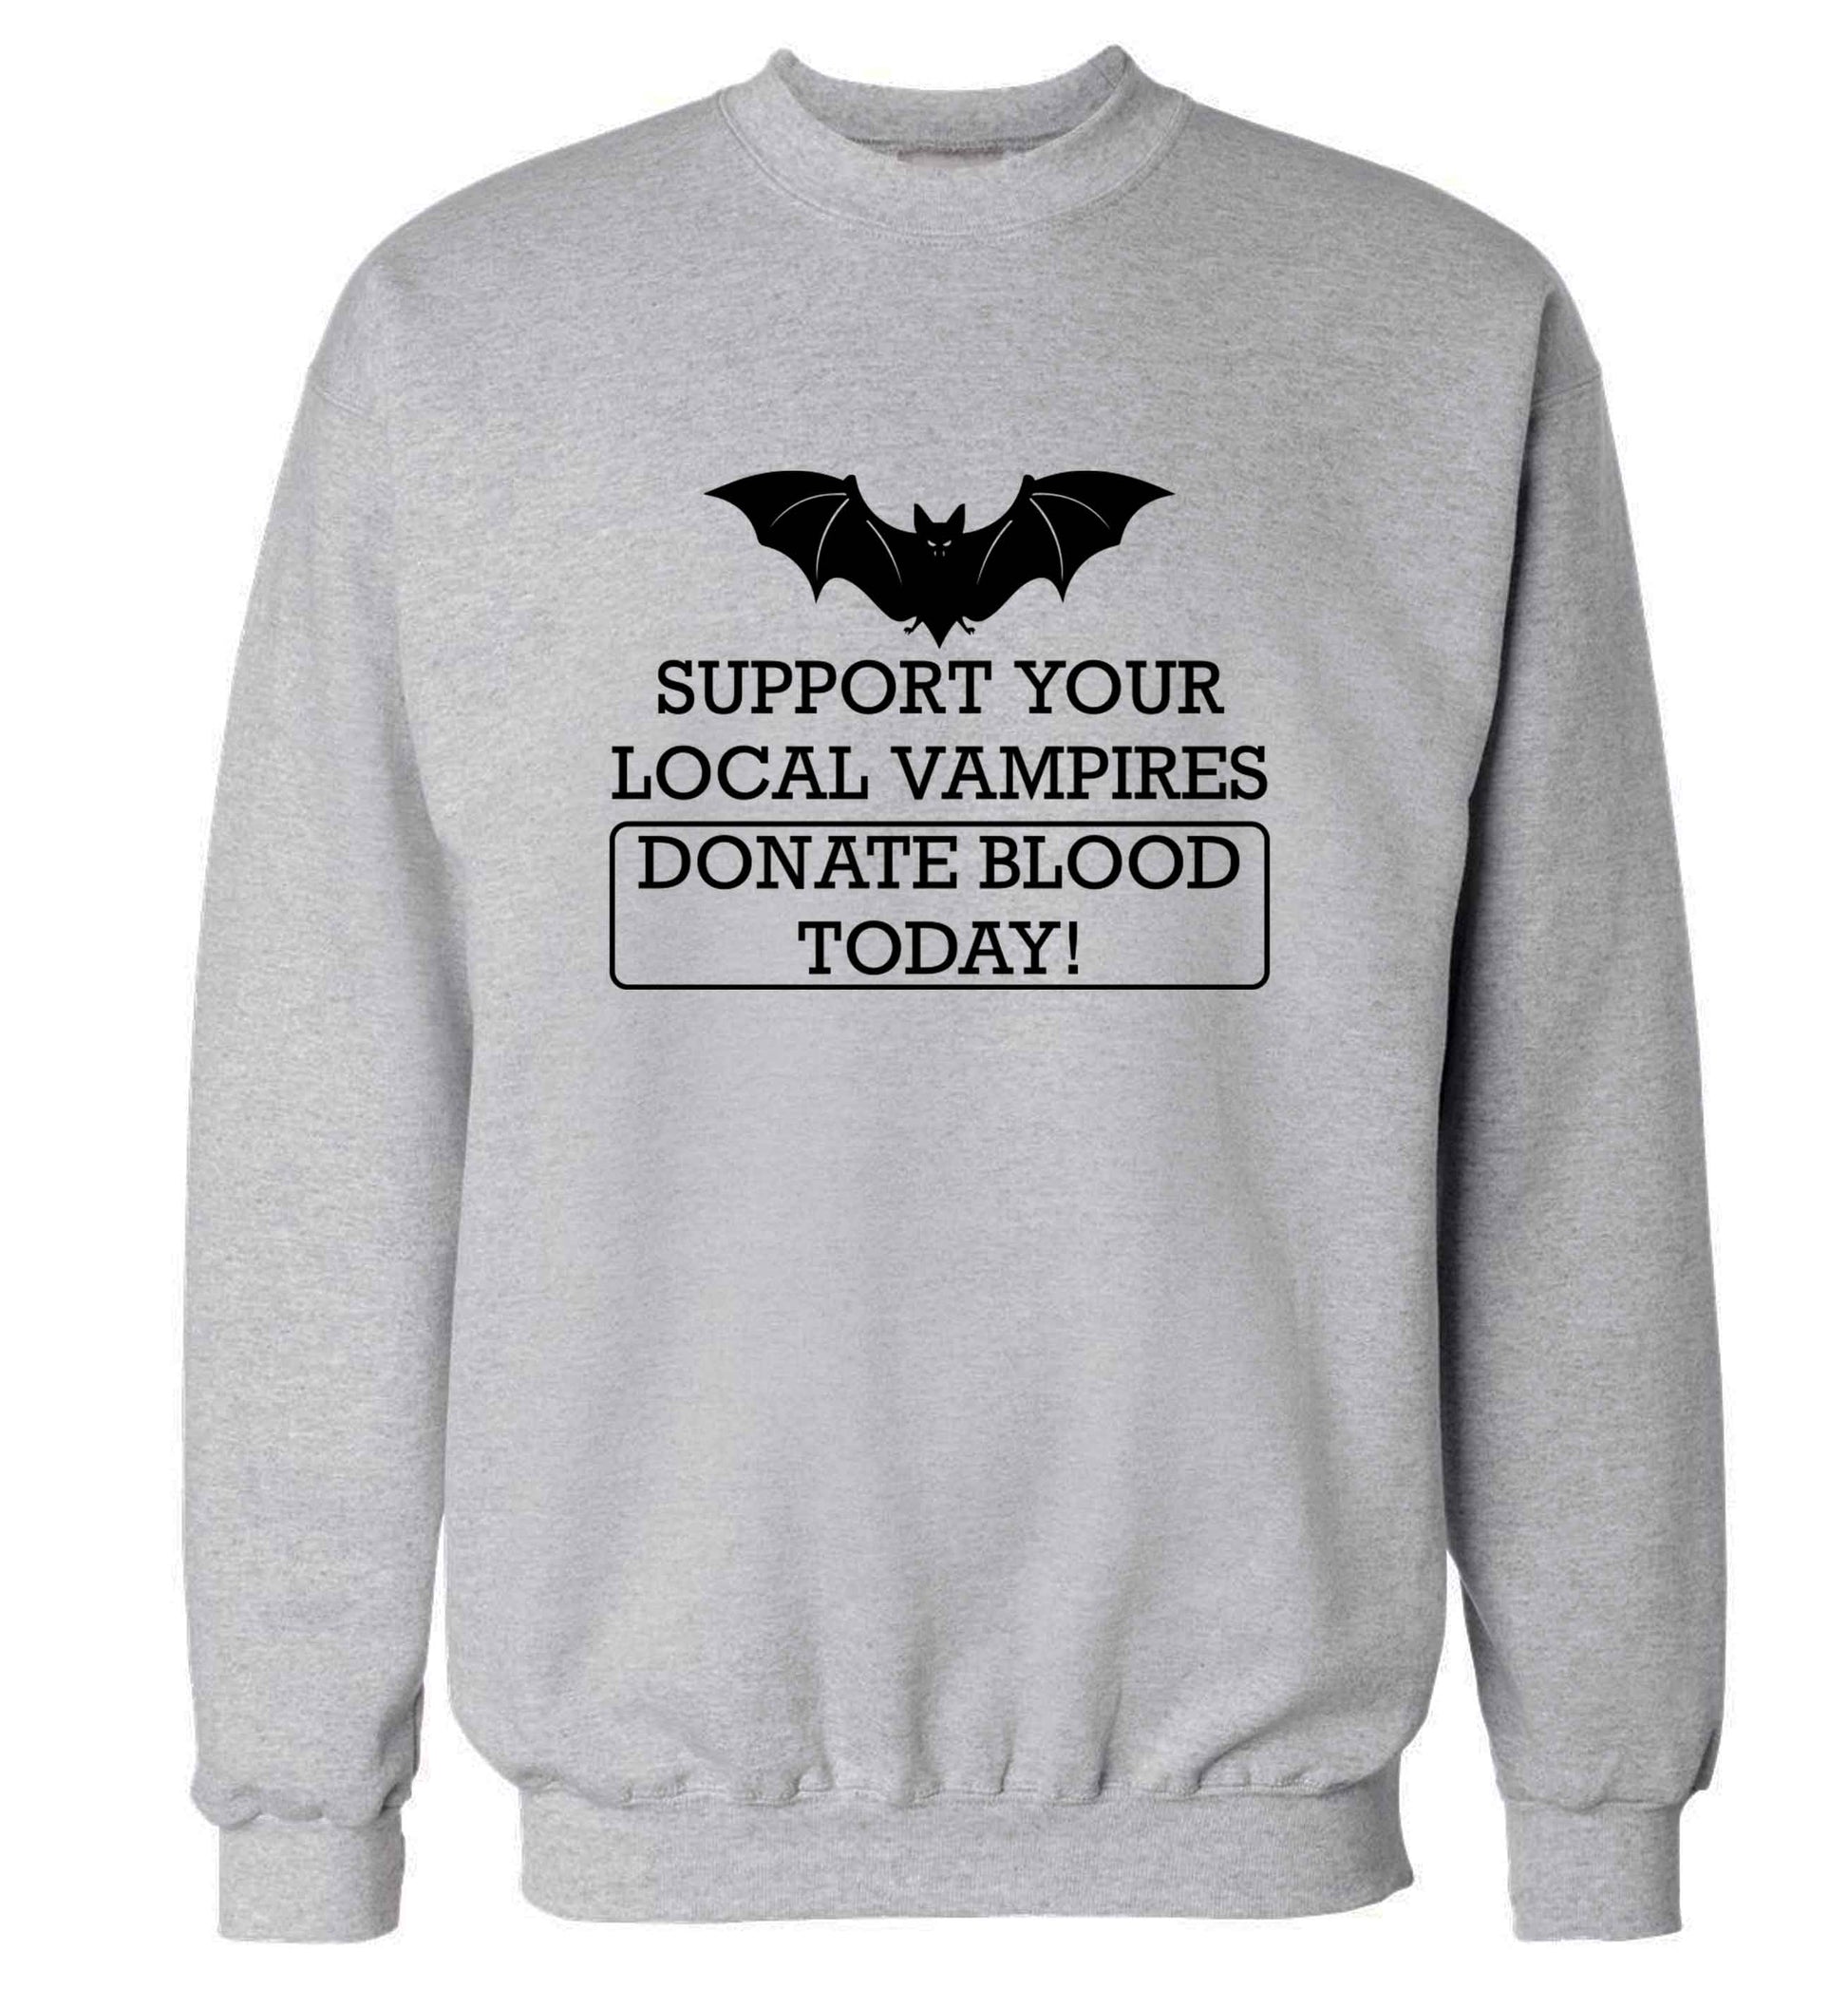 Support your local vampires donate blood today! adult's unisex grey sweater 2XL